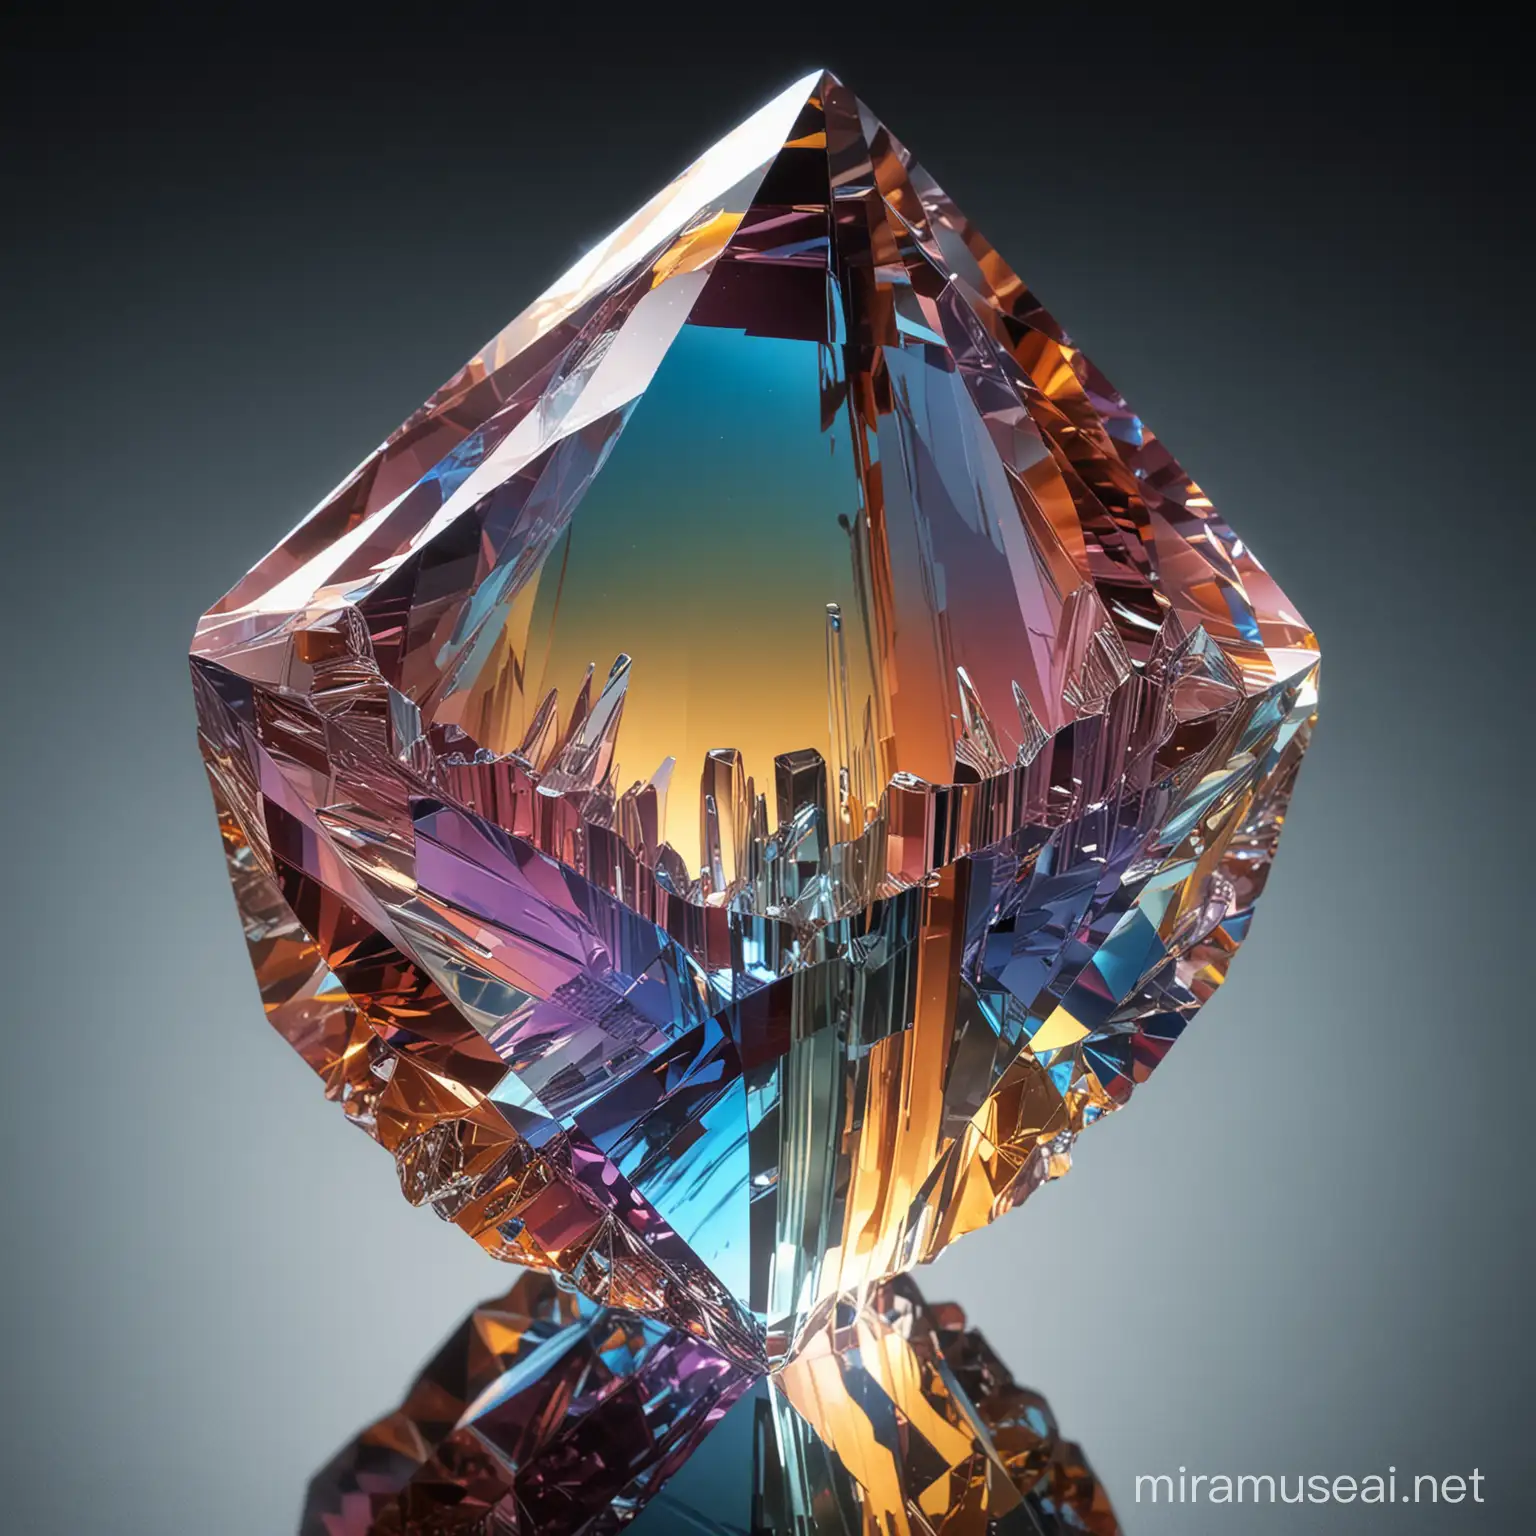 a stunning translucent crystal, with a shiny colorful crystal which is in it. the colorful reflections are visible, and looks like a ray tracing image.